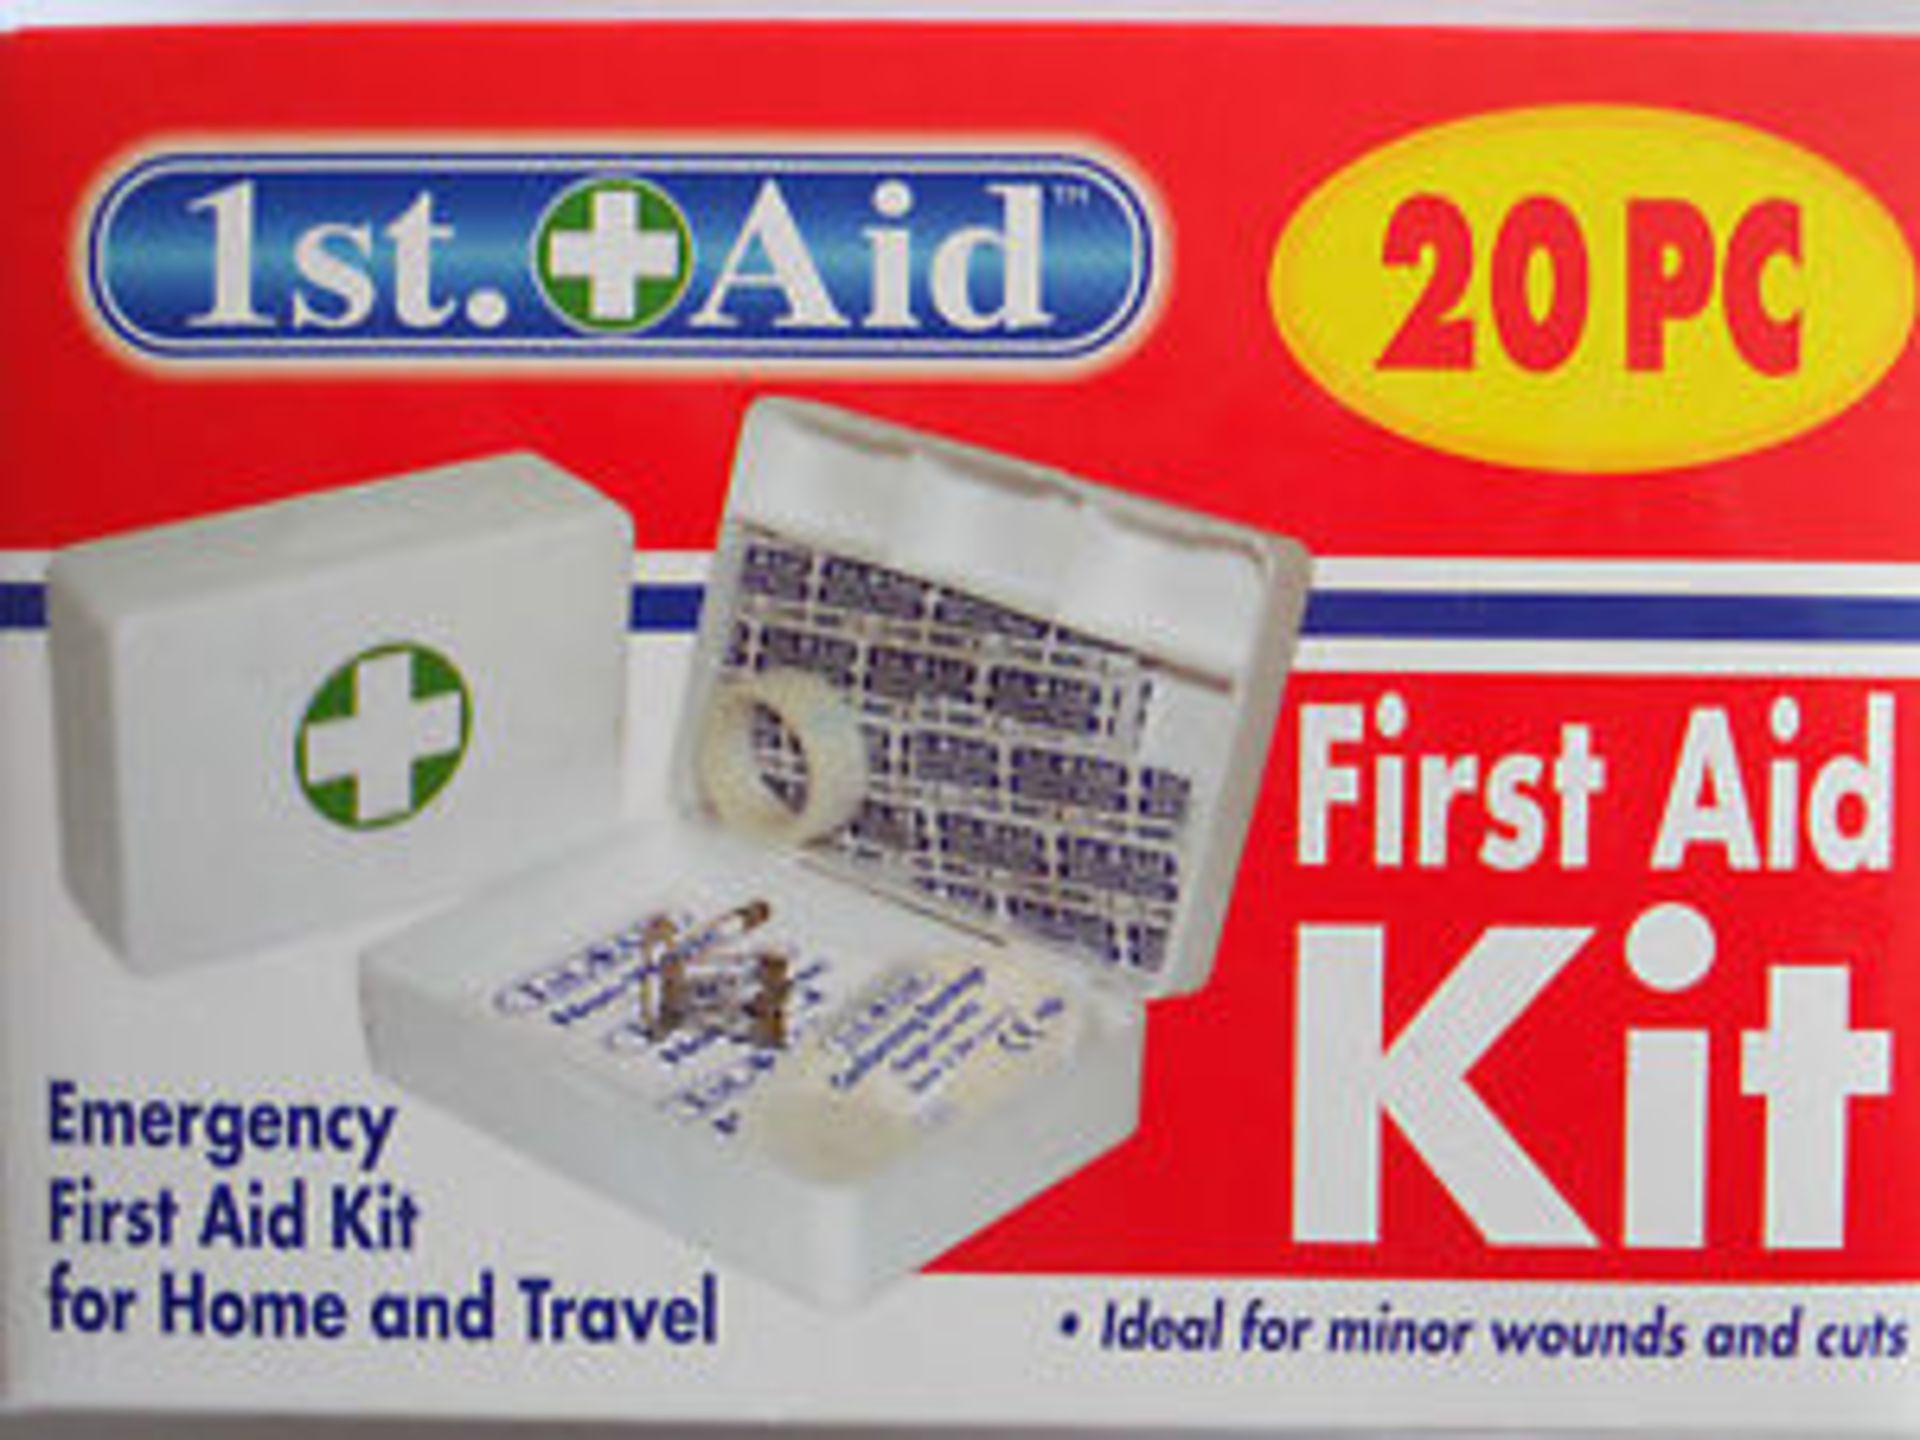 V *TRADE QTY* Brand New Six 20pc First Aid Kits In Plastic Case X 4 YOUR BID PRICE TO BE